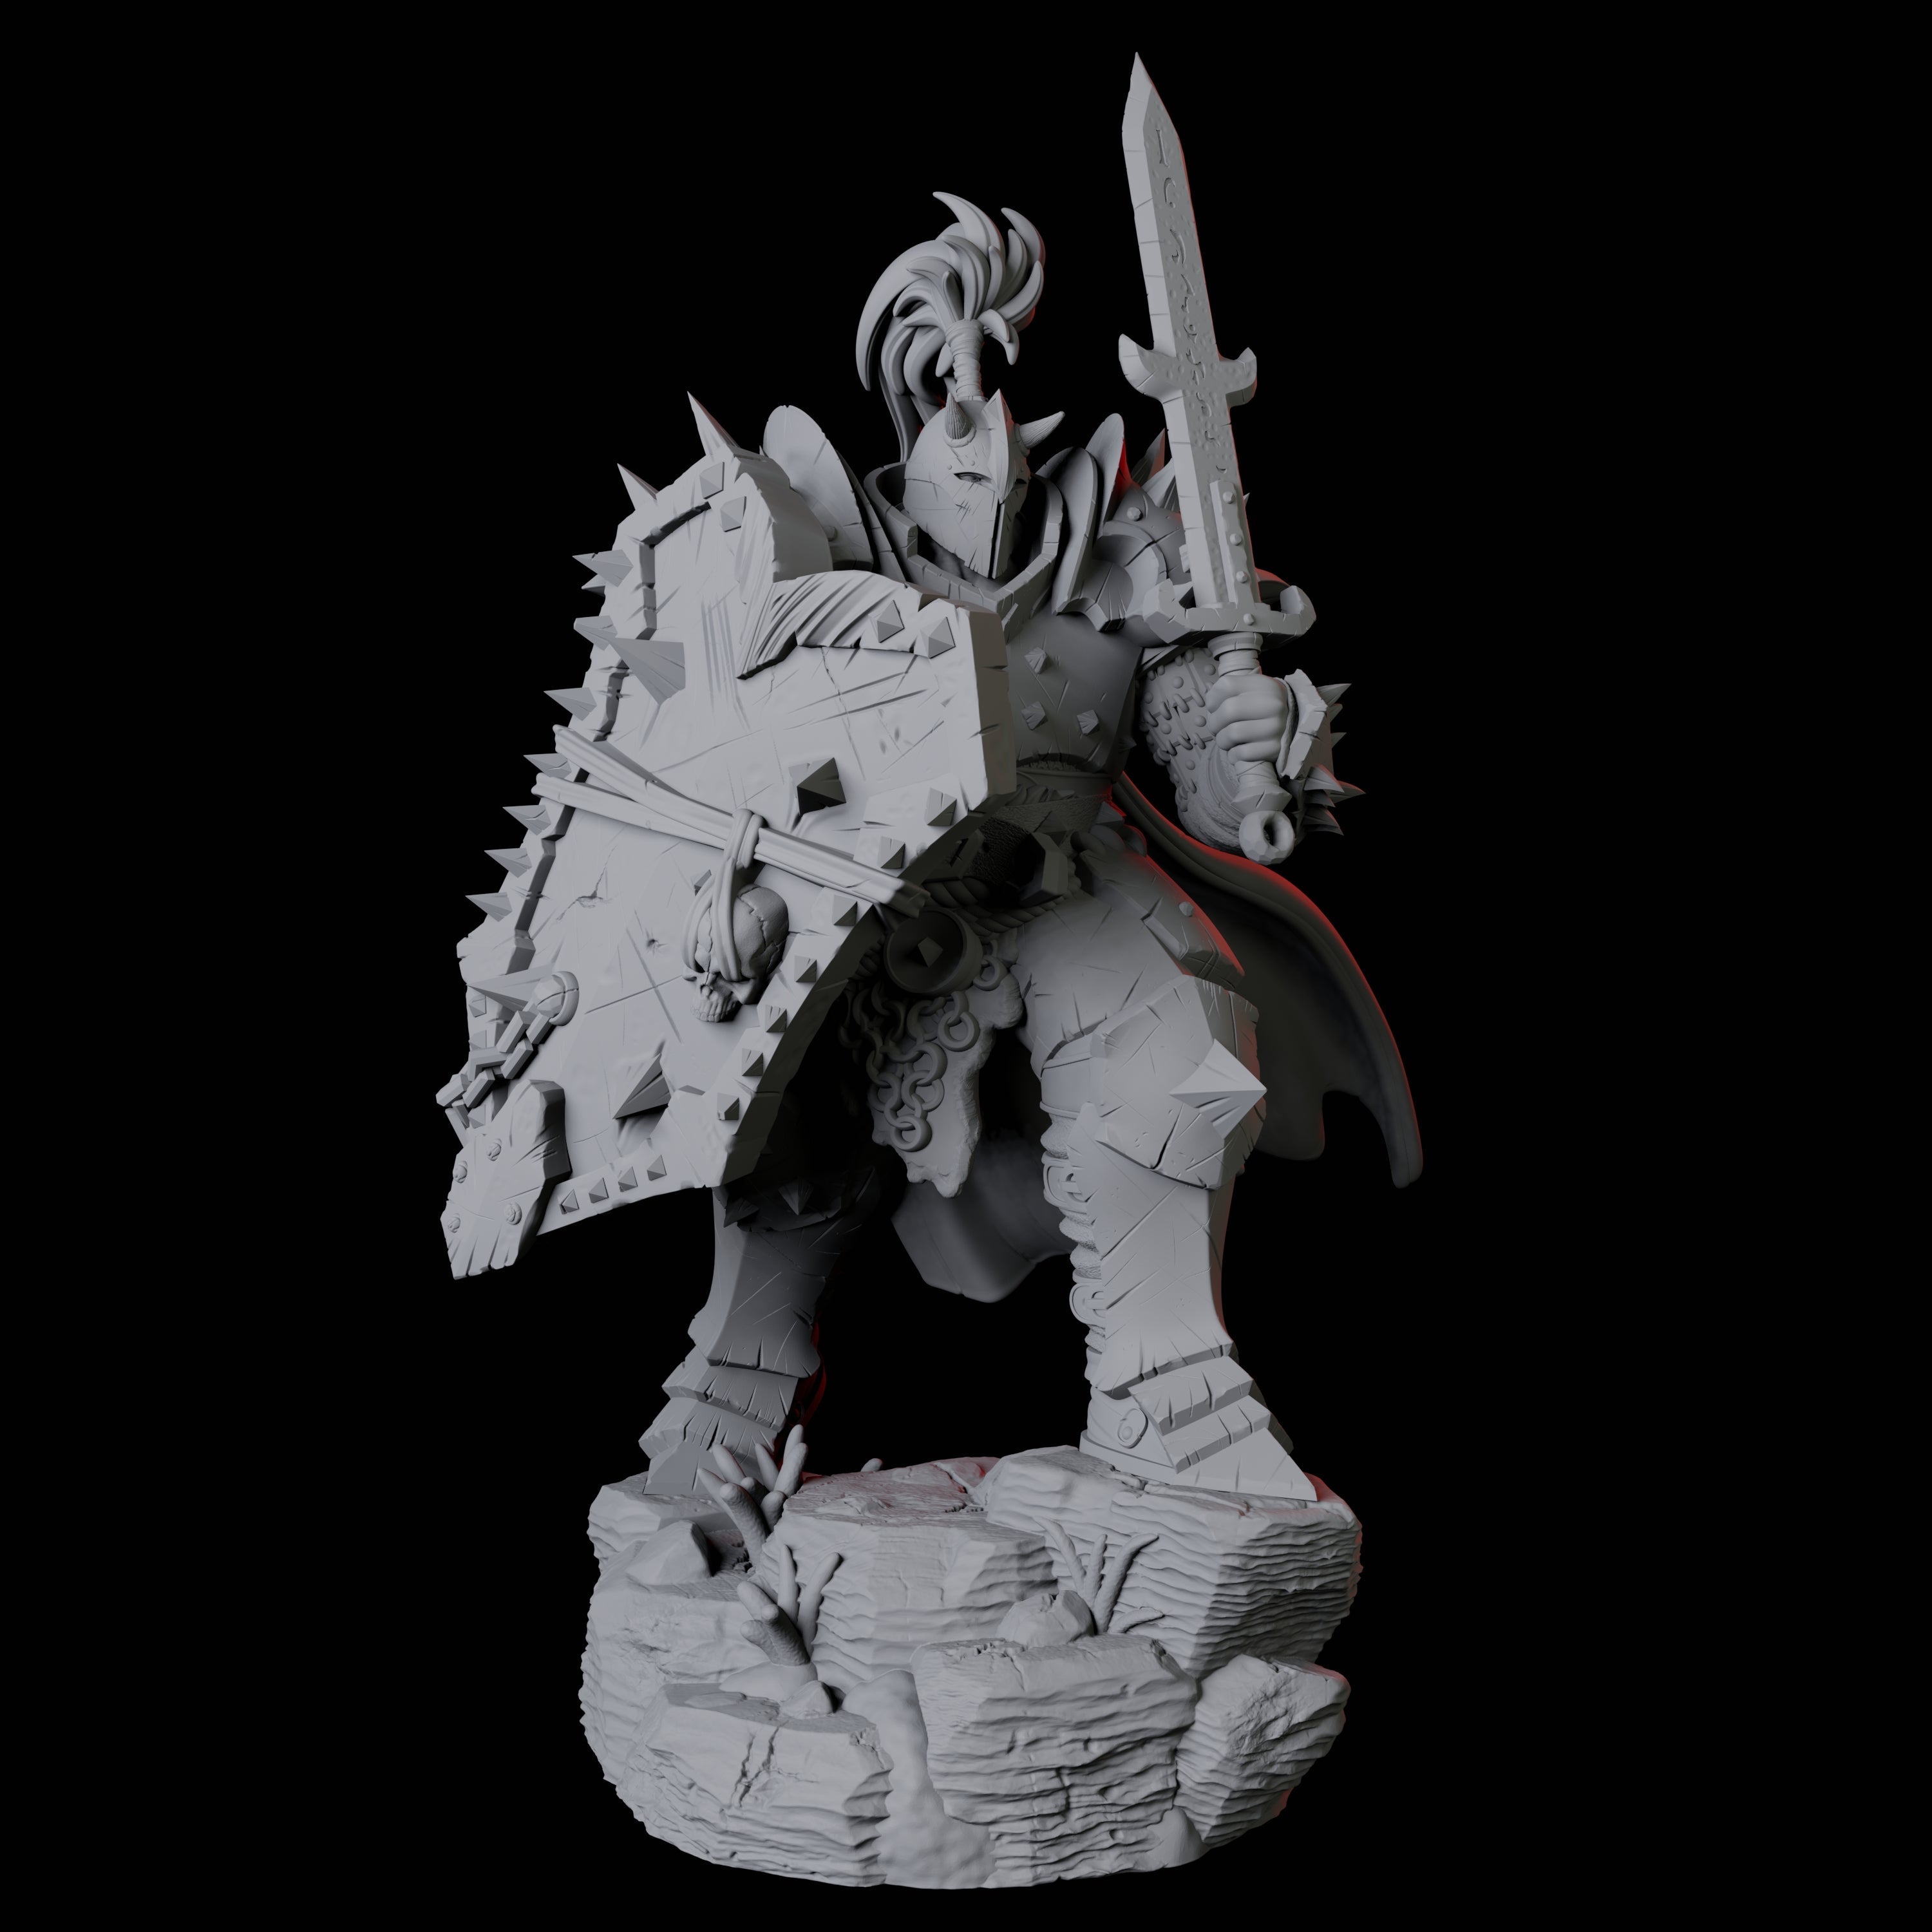 Hulking Armoured Barbarians Miniature for Dungeons and Dragons, Pathfinder or other TTRPGs